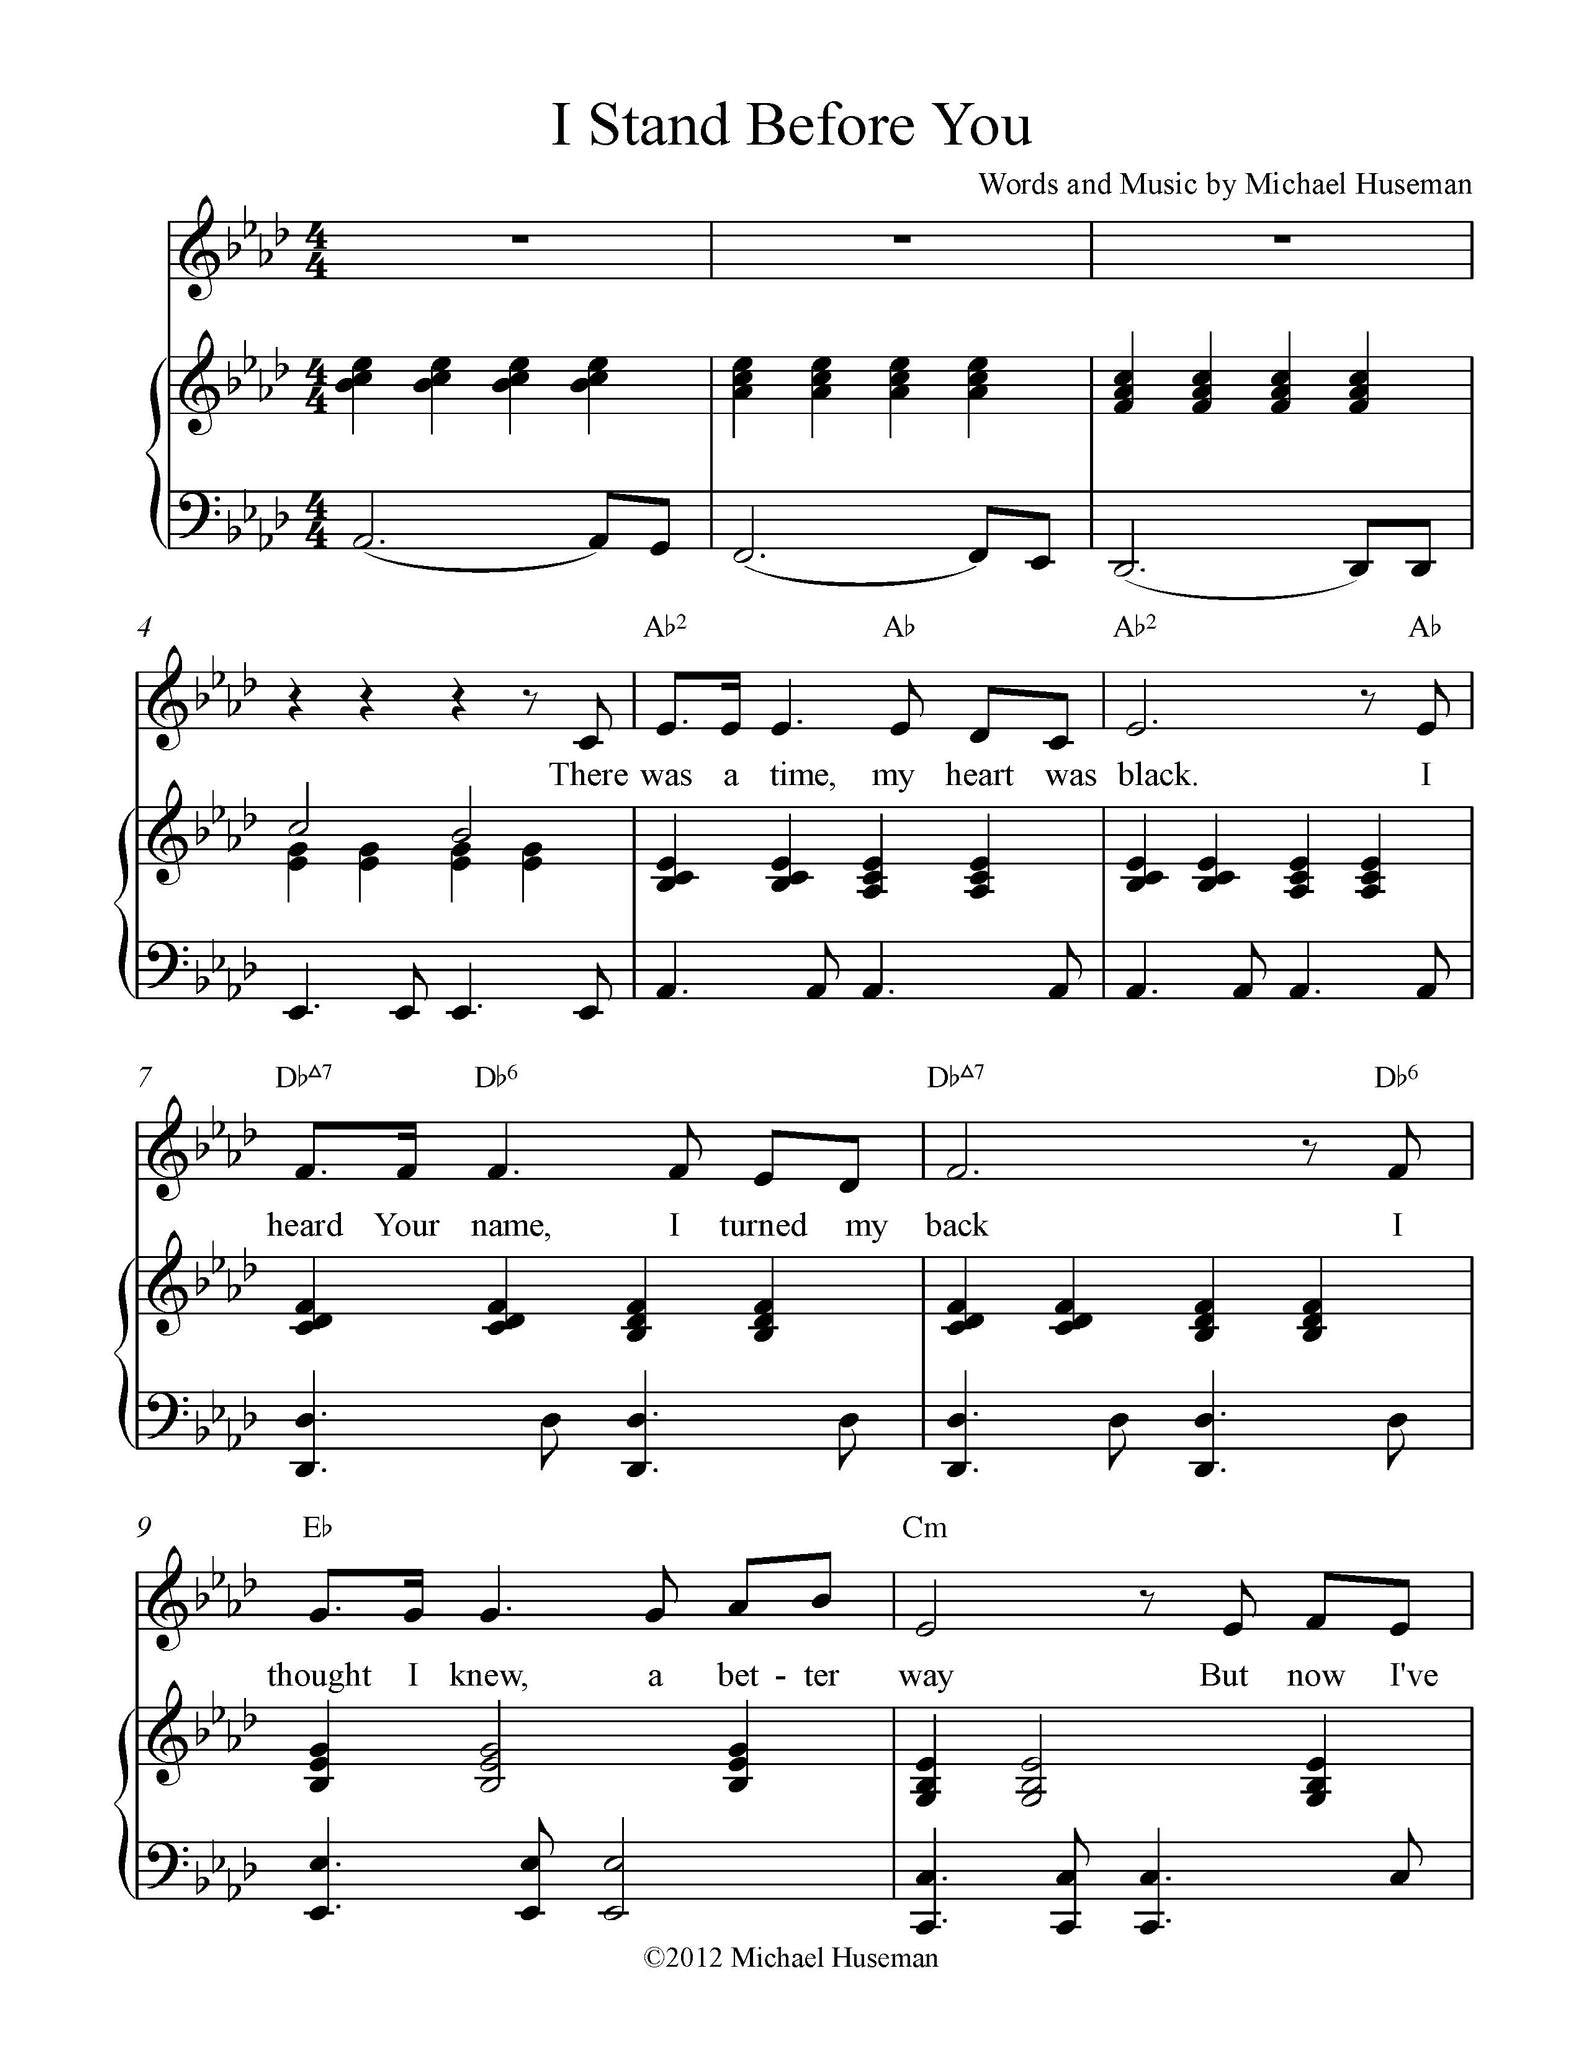 Sheet music for I Stand Before You